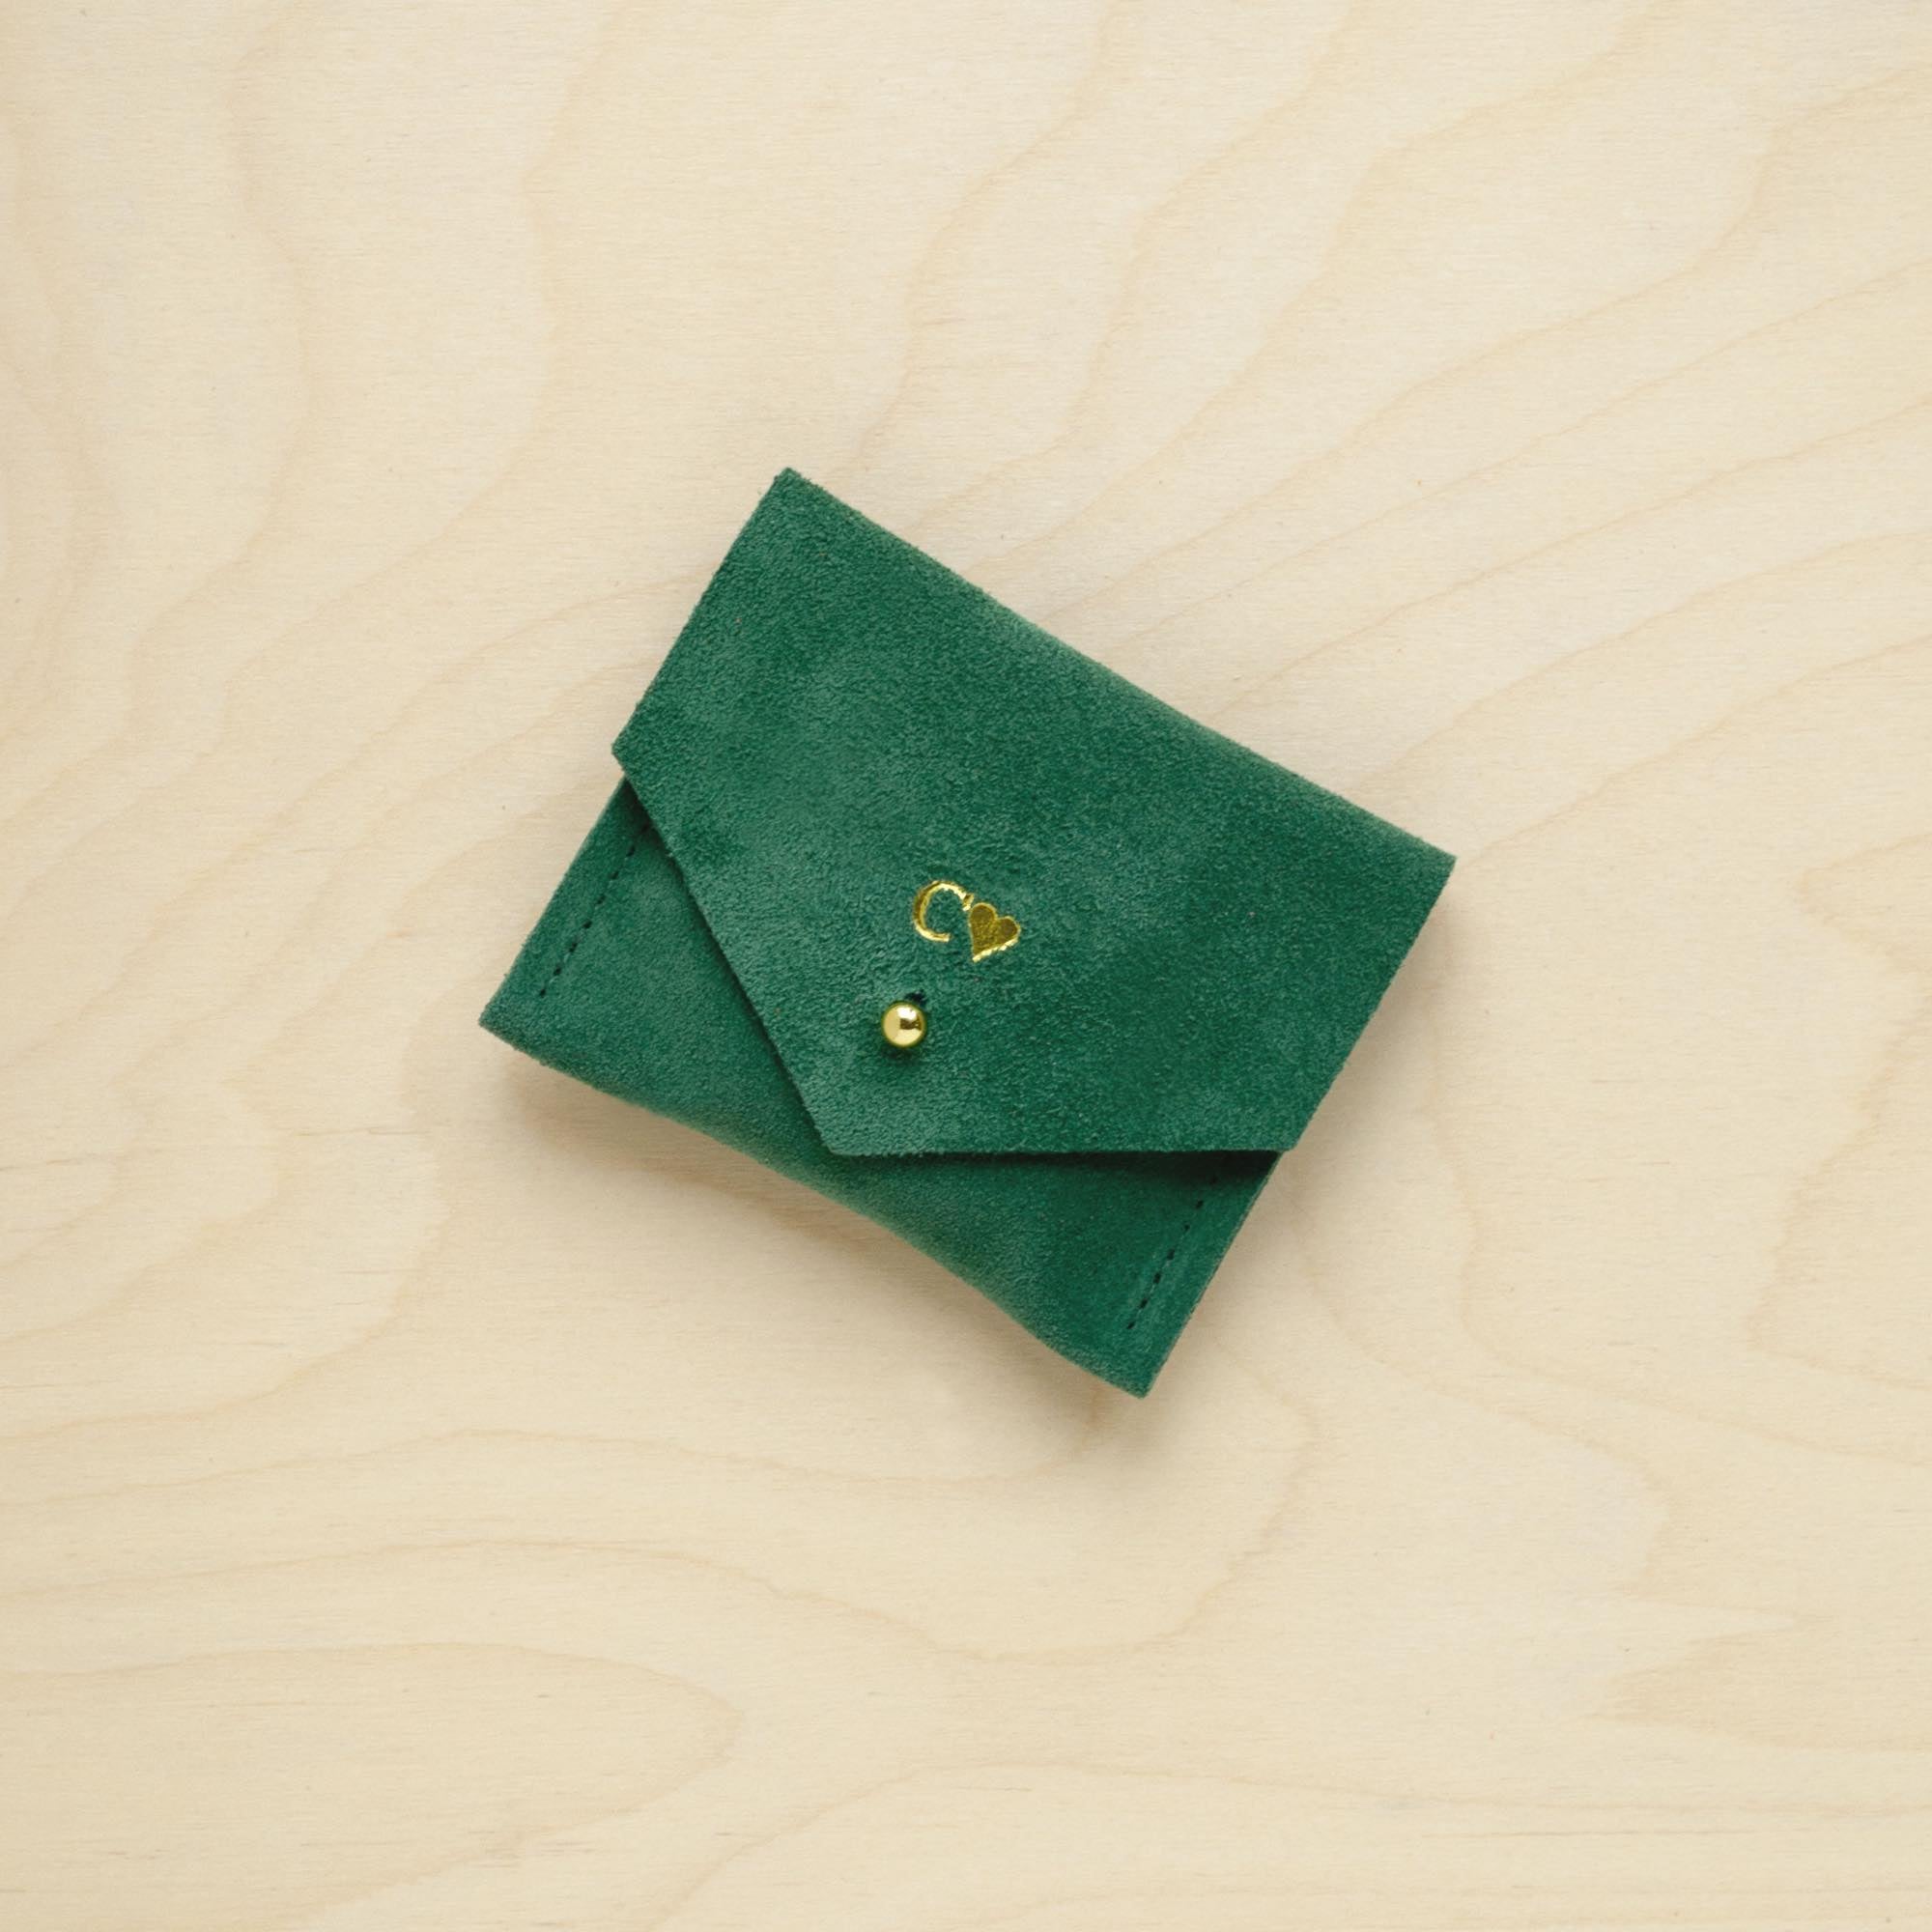 A suede Stitch Markers pouch in  Moss Green. Complete with a stud for secure closing. This pouch has been personalised with initial and love heart.